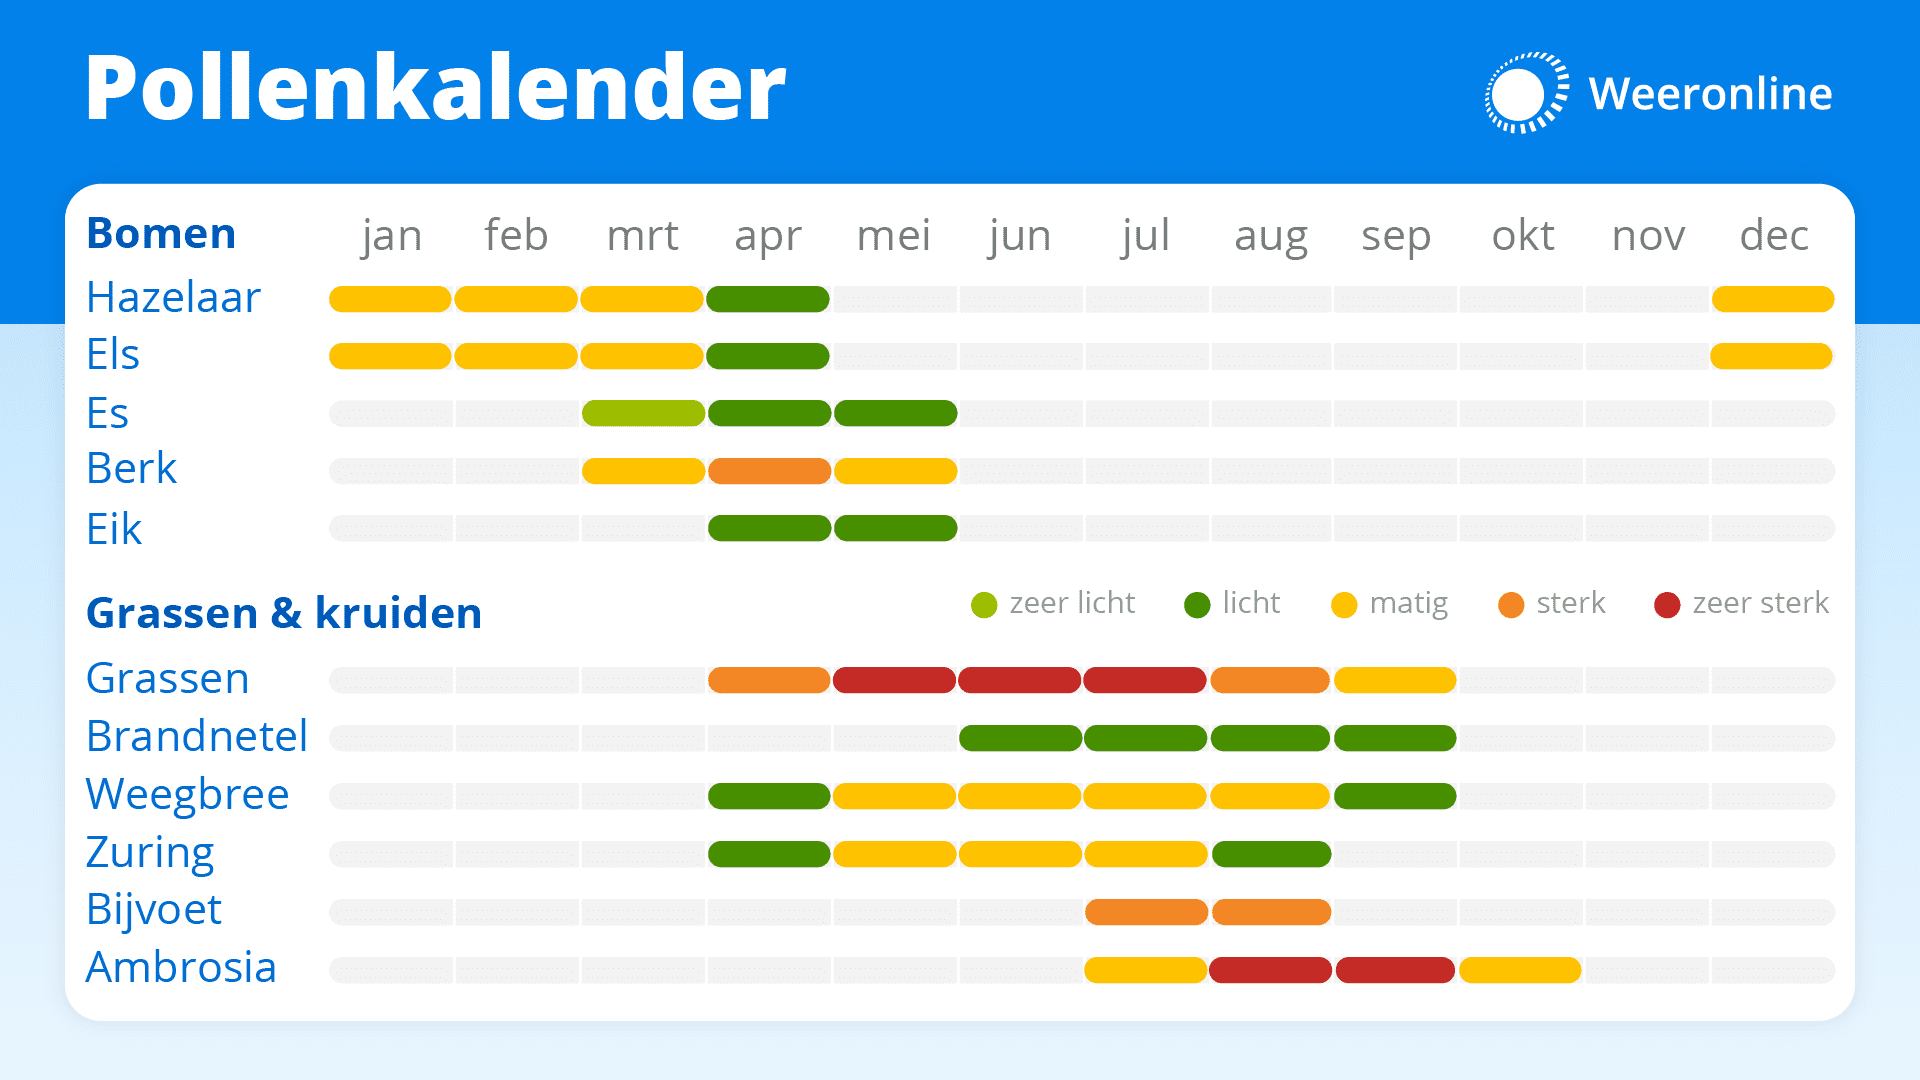 In this hay fever calendar, you can find out when different trees and plants cause hay fever complaints on average.  Trees and plants not mentioned here cause no or very few complaints.